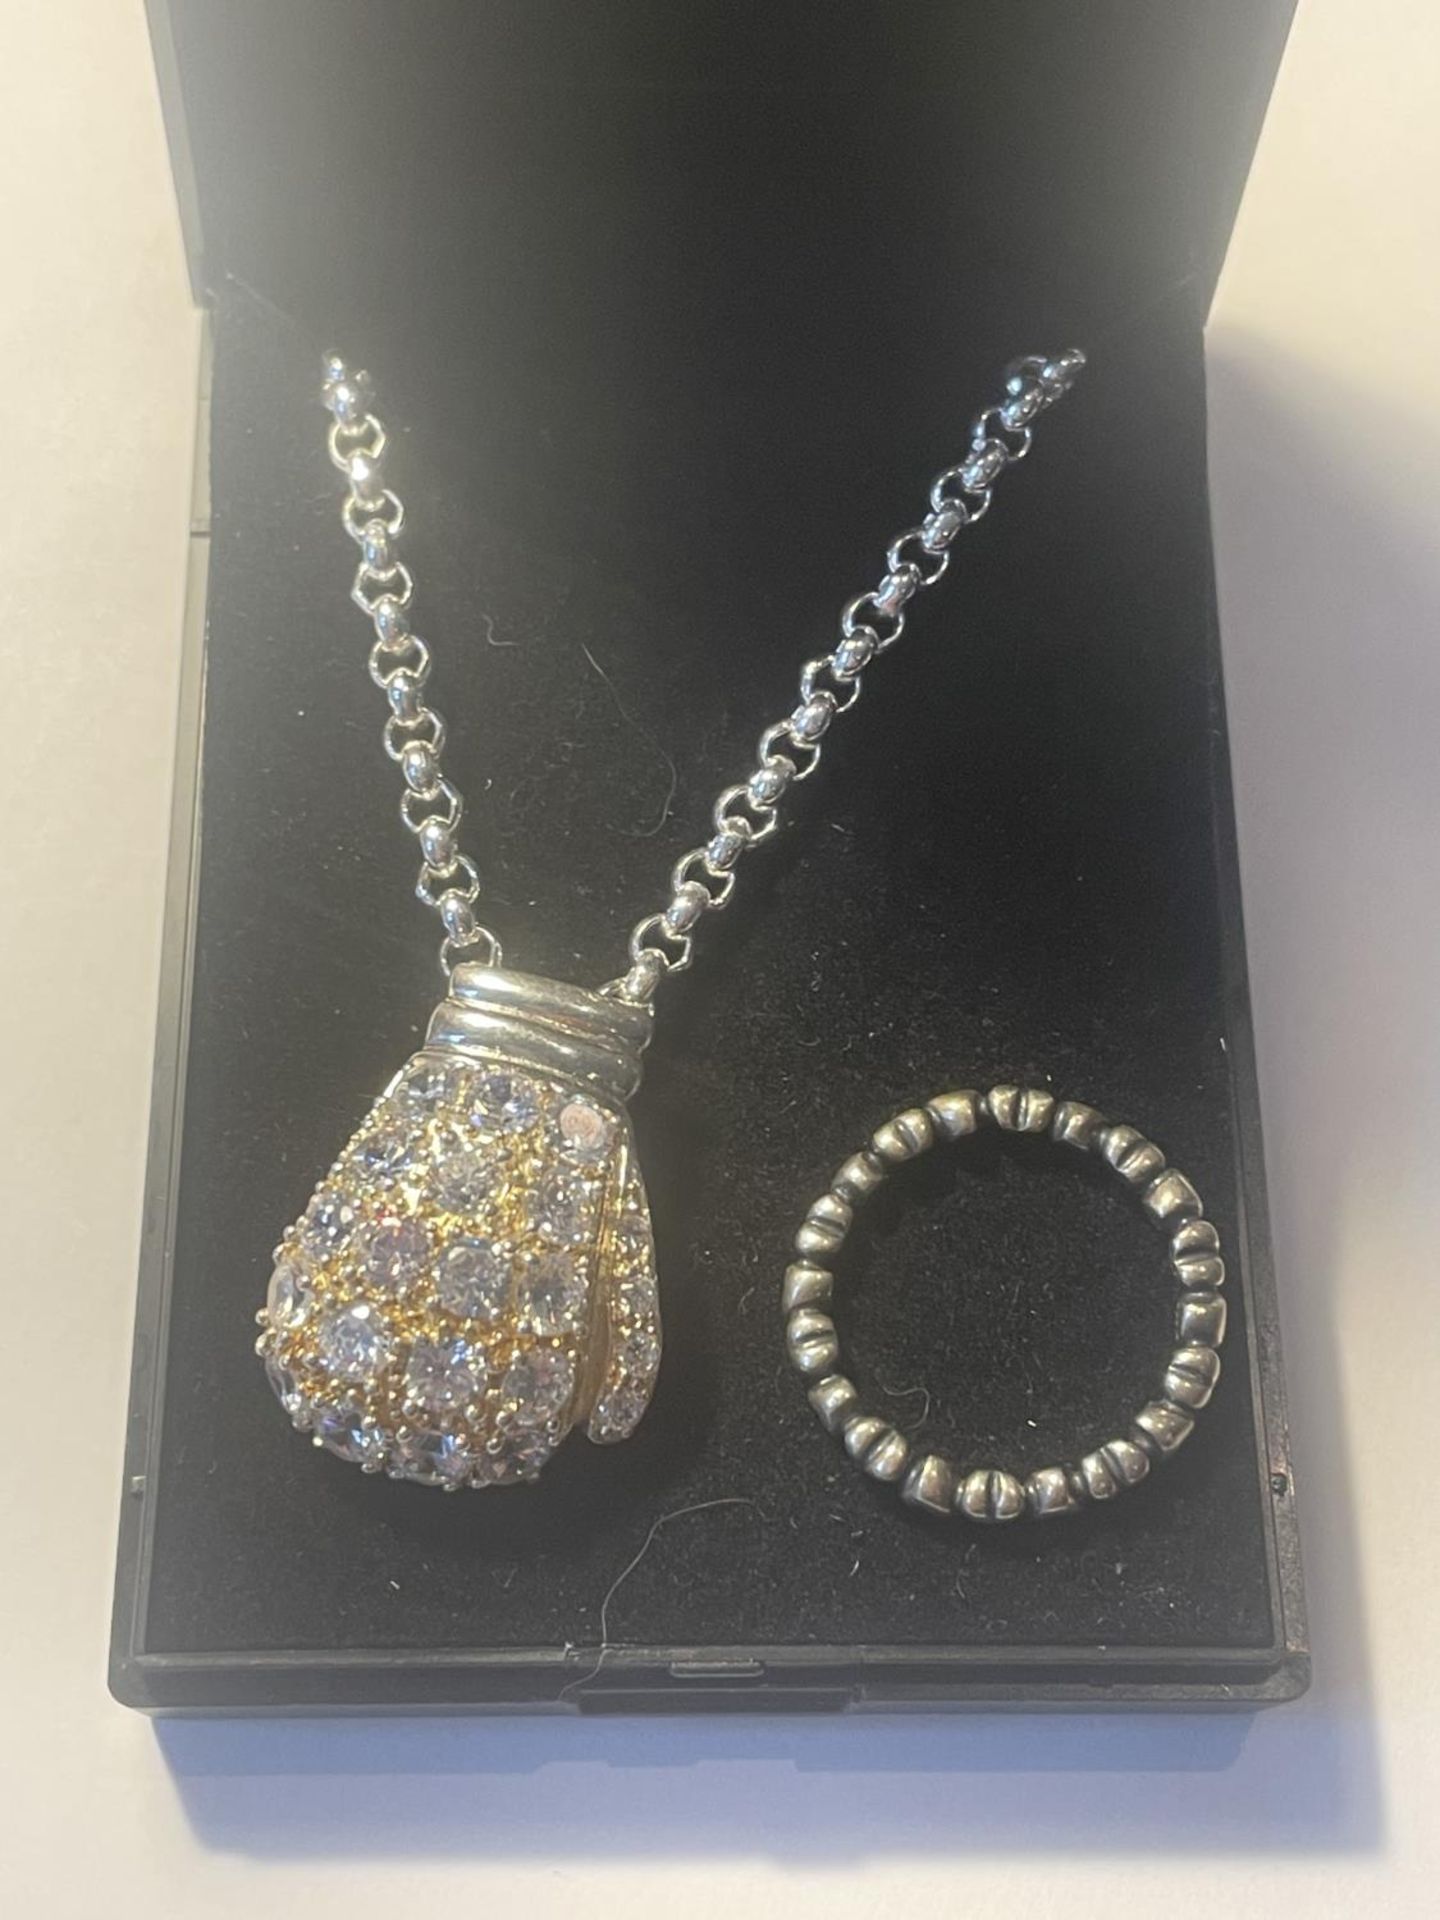 TWO MARKED SILVER ITEMS TO INCLUDE A CHAIN WITH CLEAR STONE BOXING GLOVE PENDANT AND A HEART